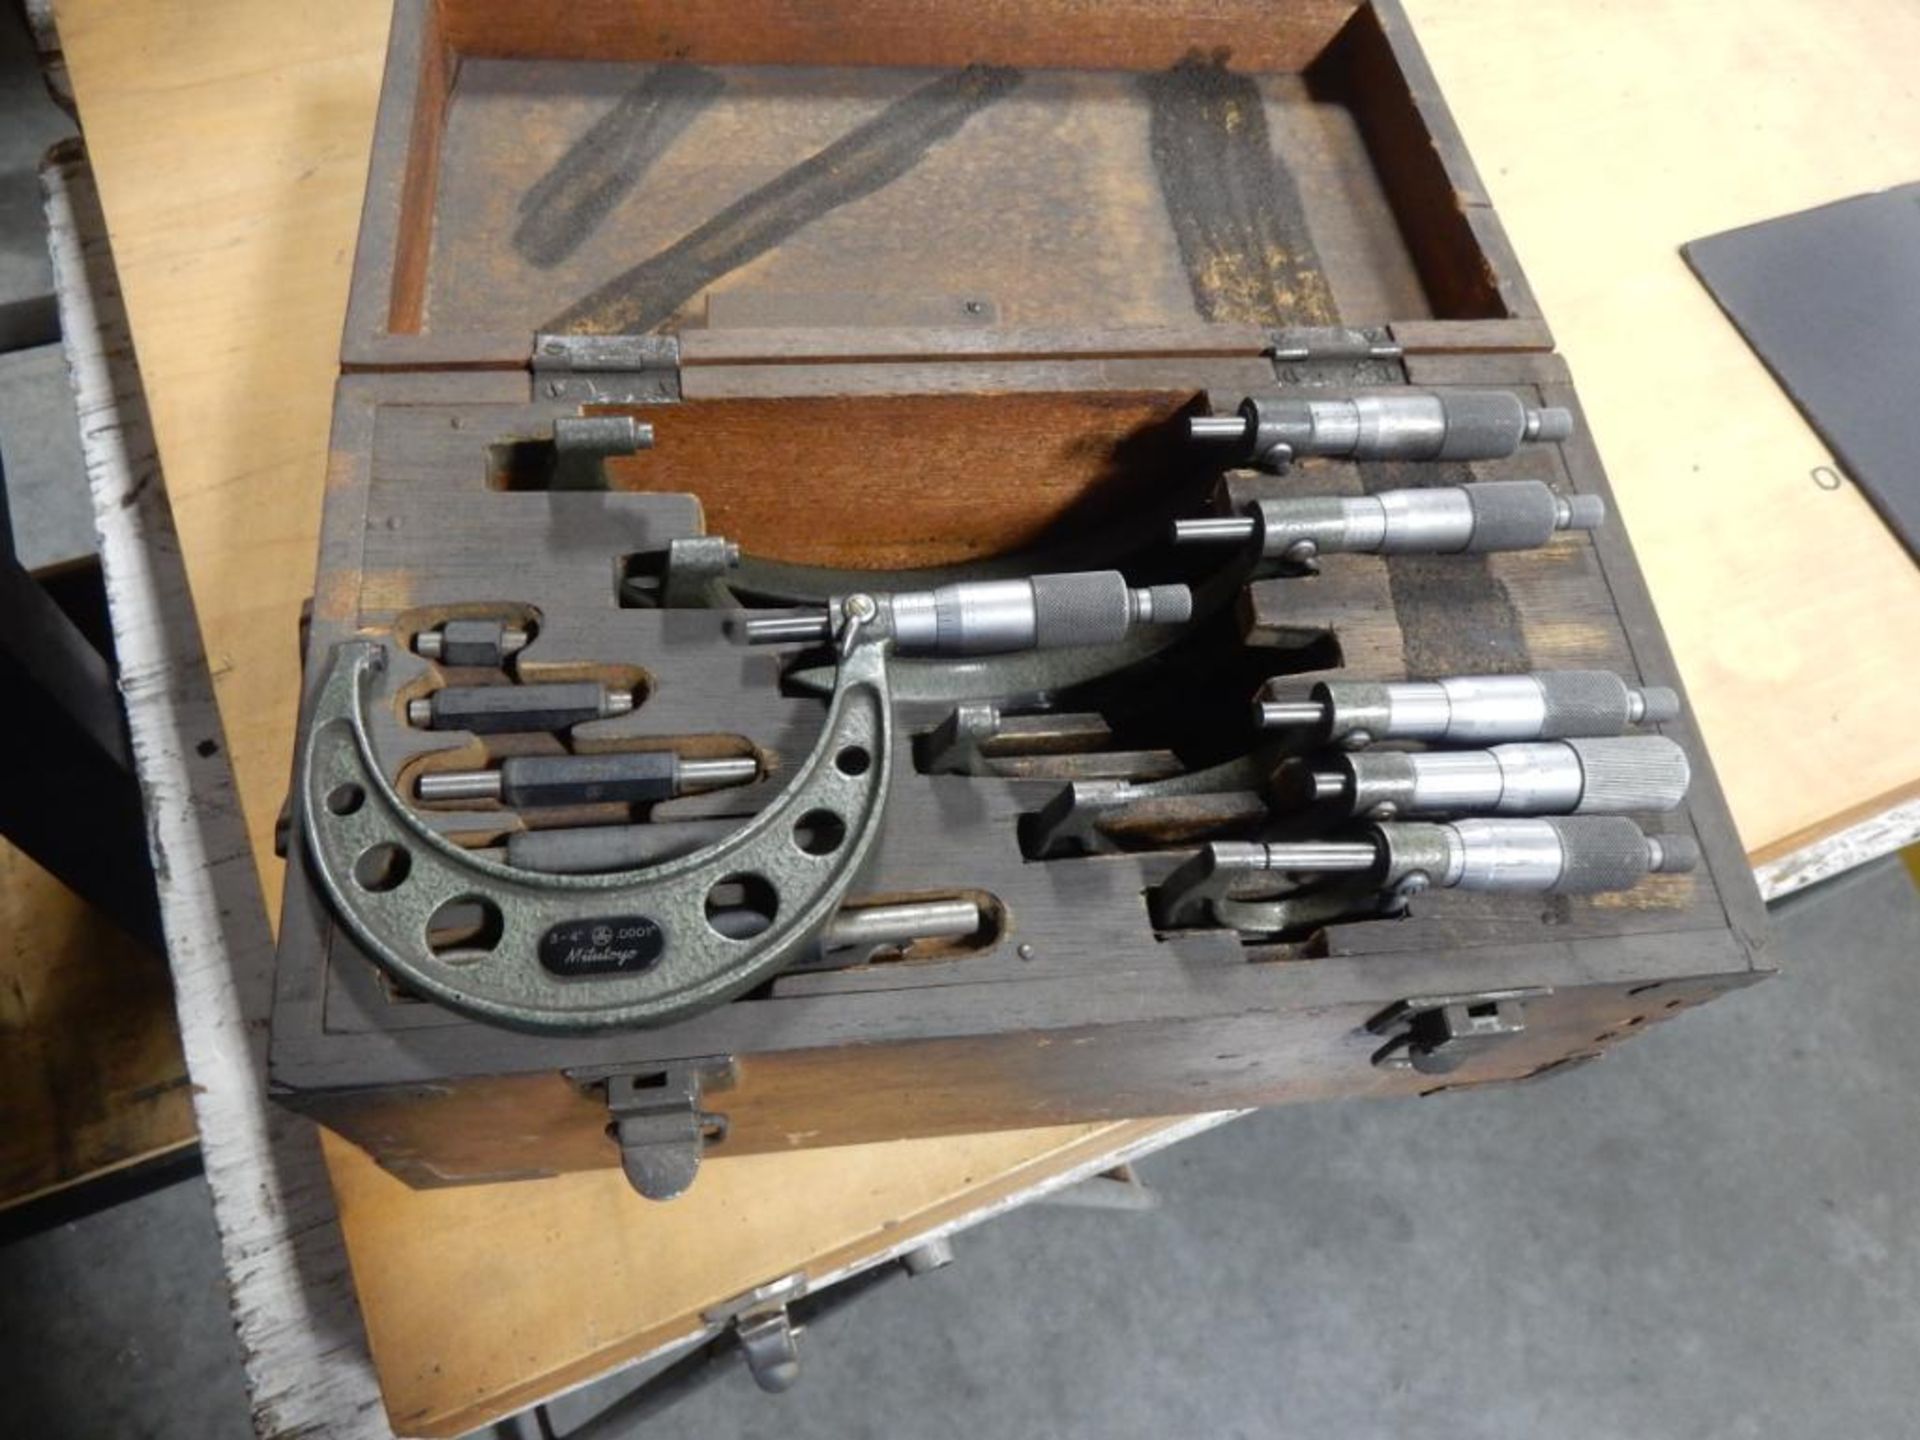 LOT (2) MISC. MICROMETER SETS - 0" - 12" & 0" - 6" - Image 2 of 2